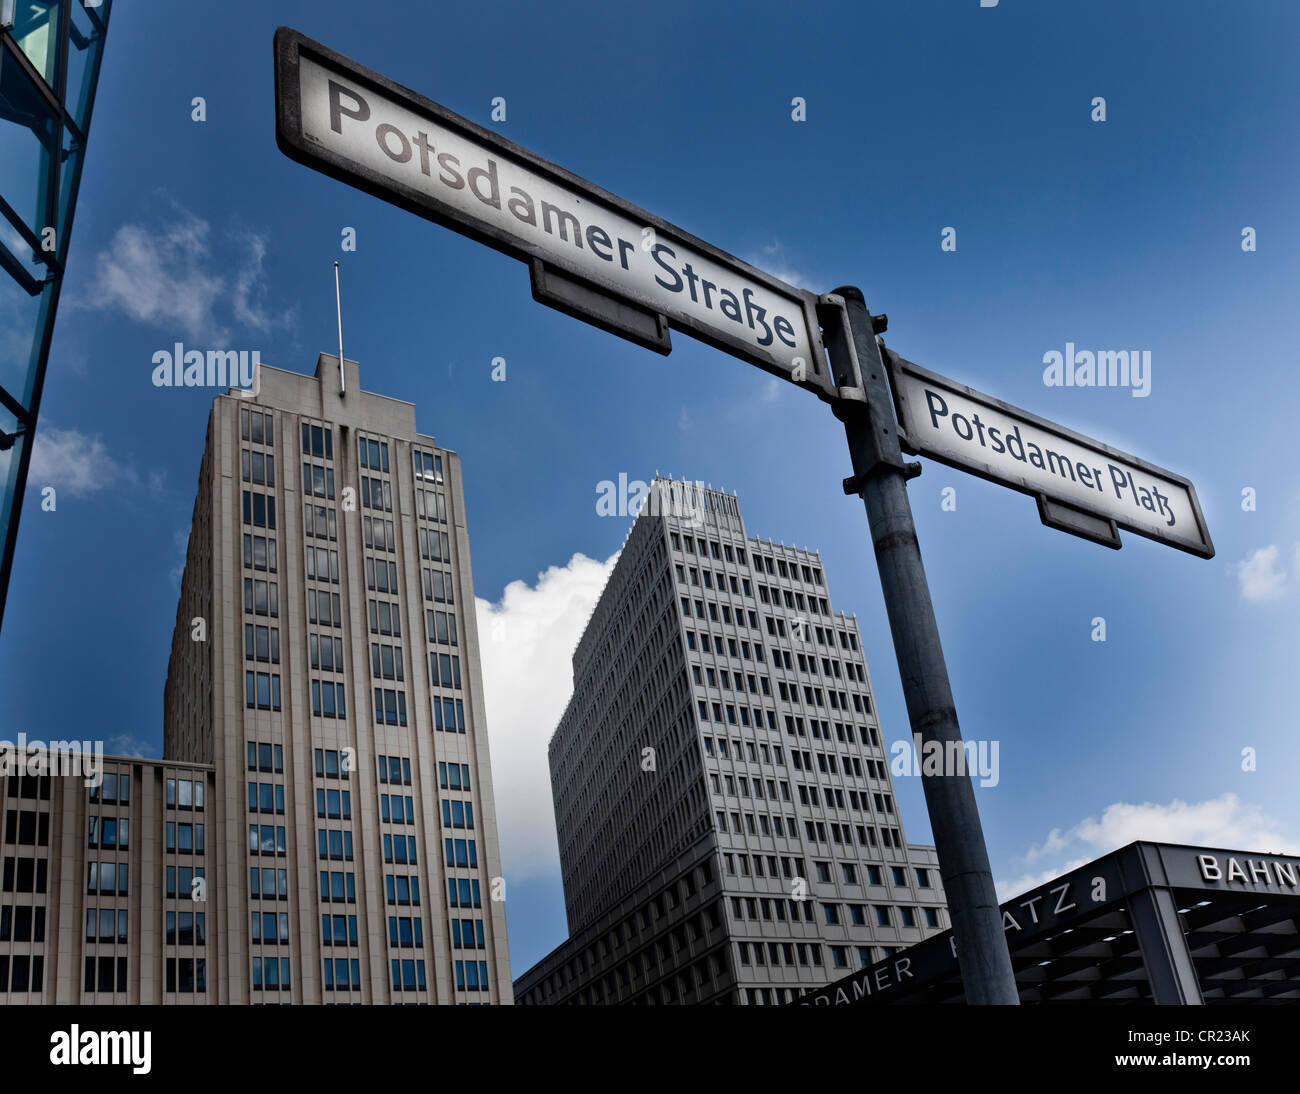 German street signs in city center Stock Photo